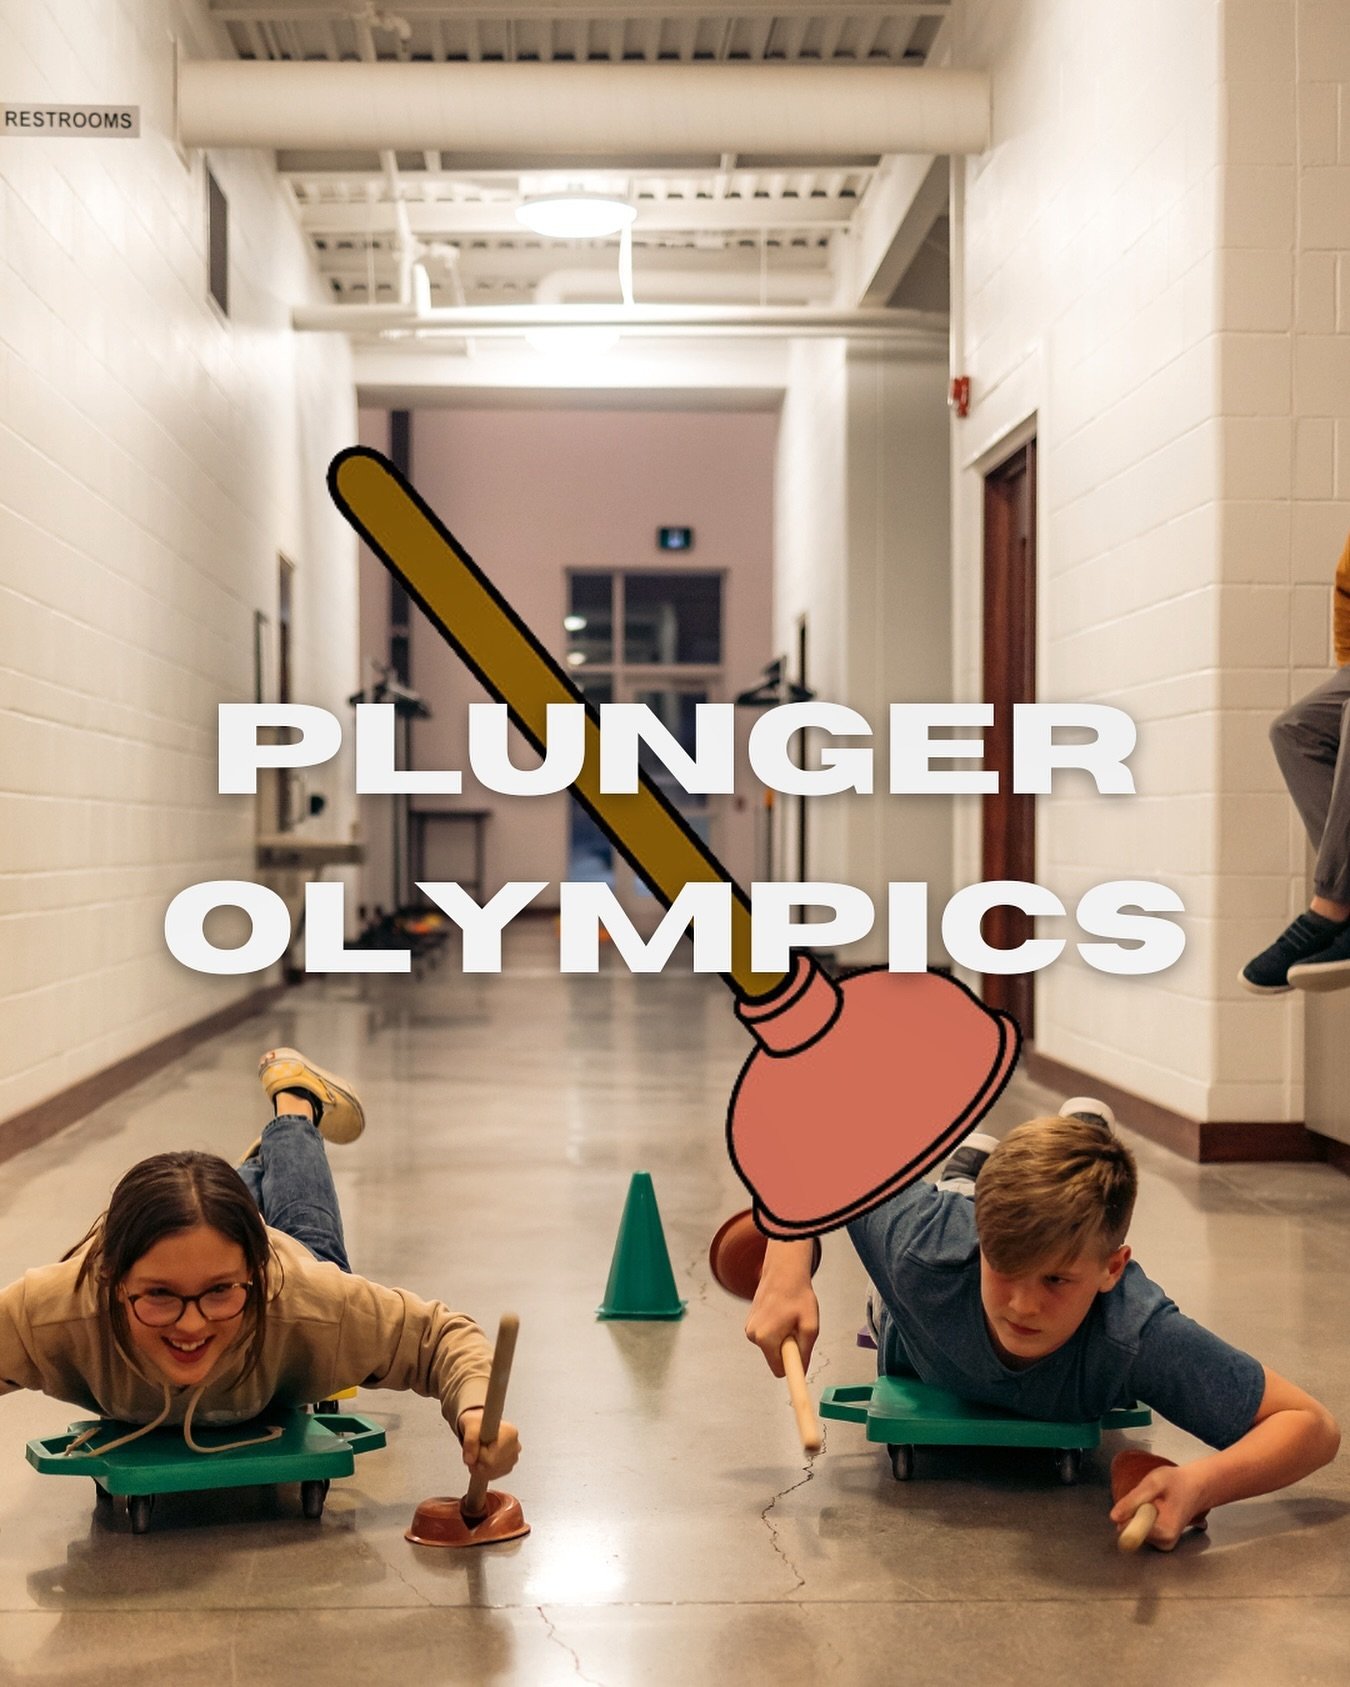 Come on out this Thursday for the annual March break plunger Olympics! From 6-7 bring $5 for dinner and hang out with open gym, and at 7 we will begin the competition for the prestigious golden toilet seat! For dinner, register through the link in ou